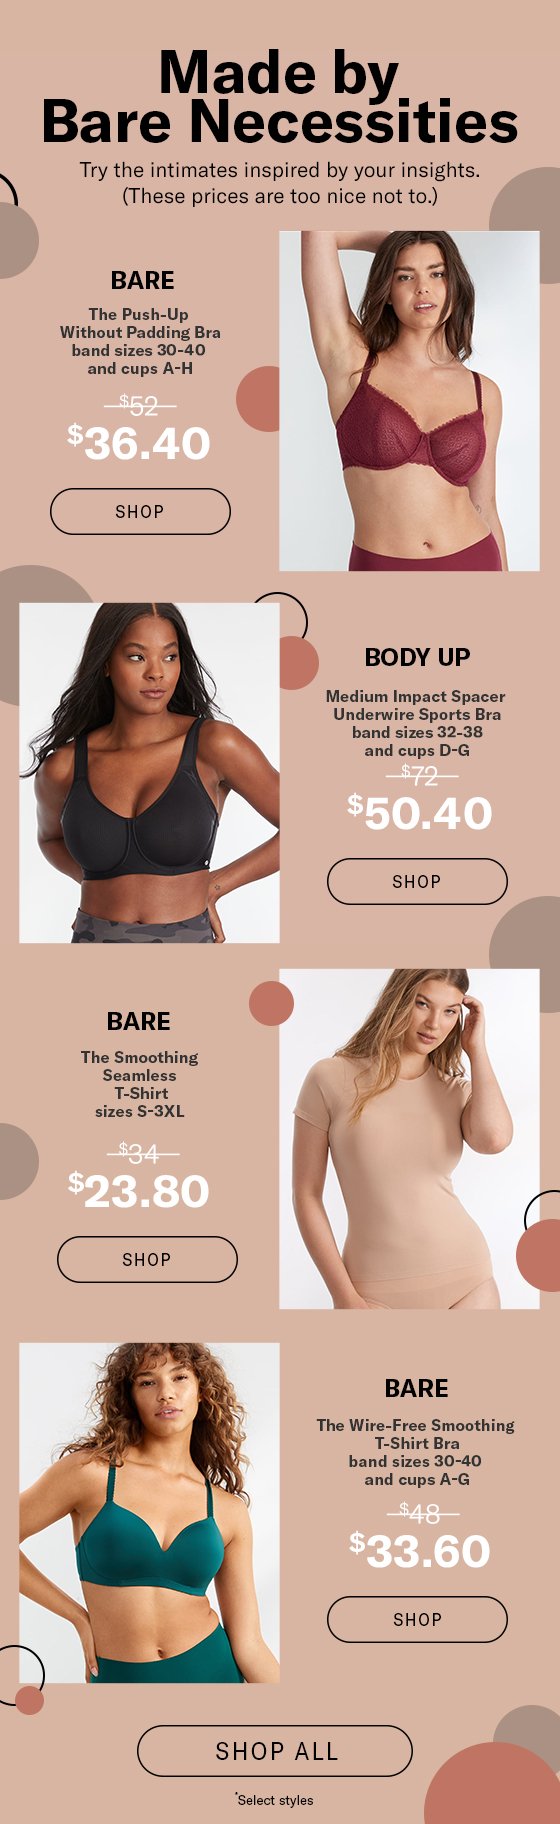 Bras Starting At $39 - Find Your Favorites! - Bare Necessities